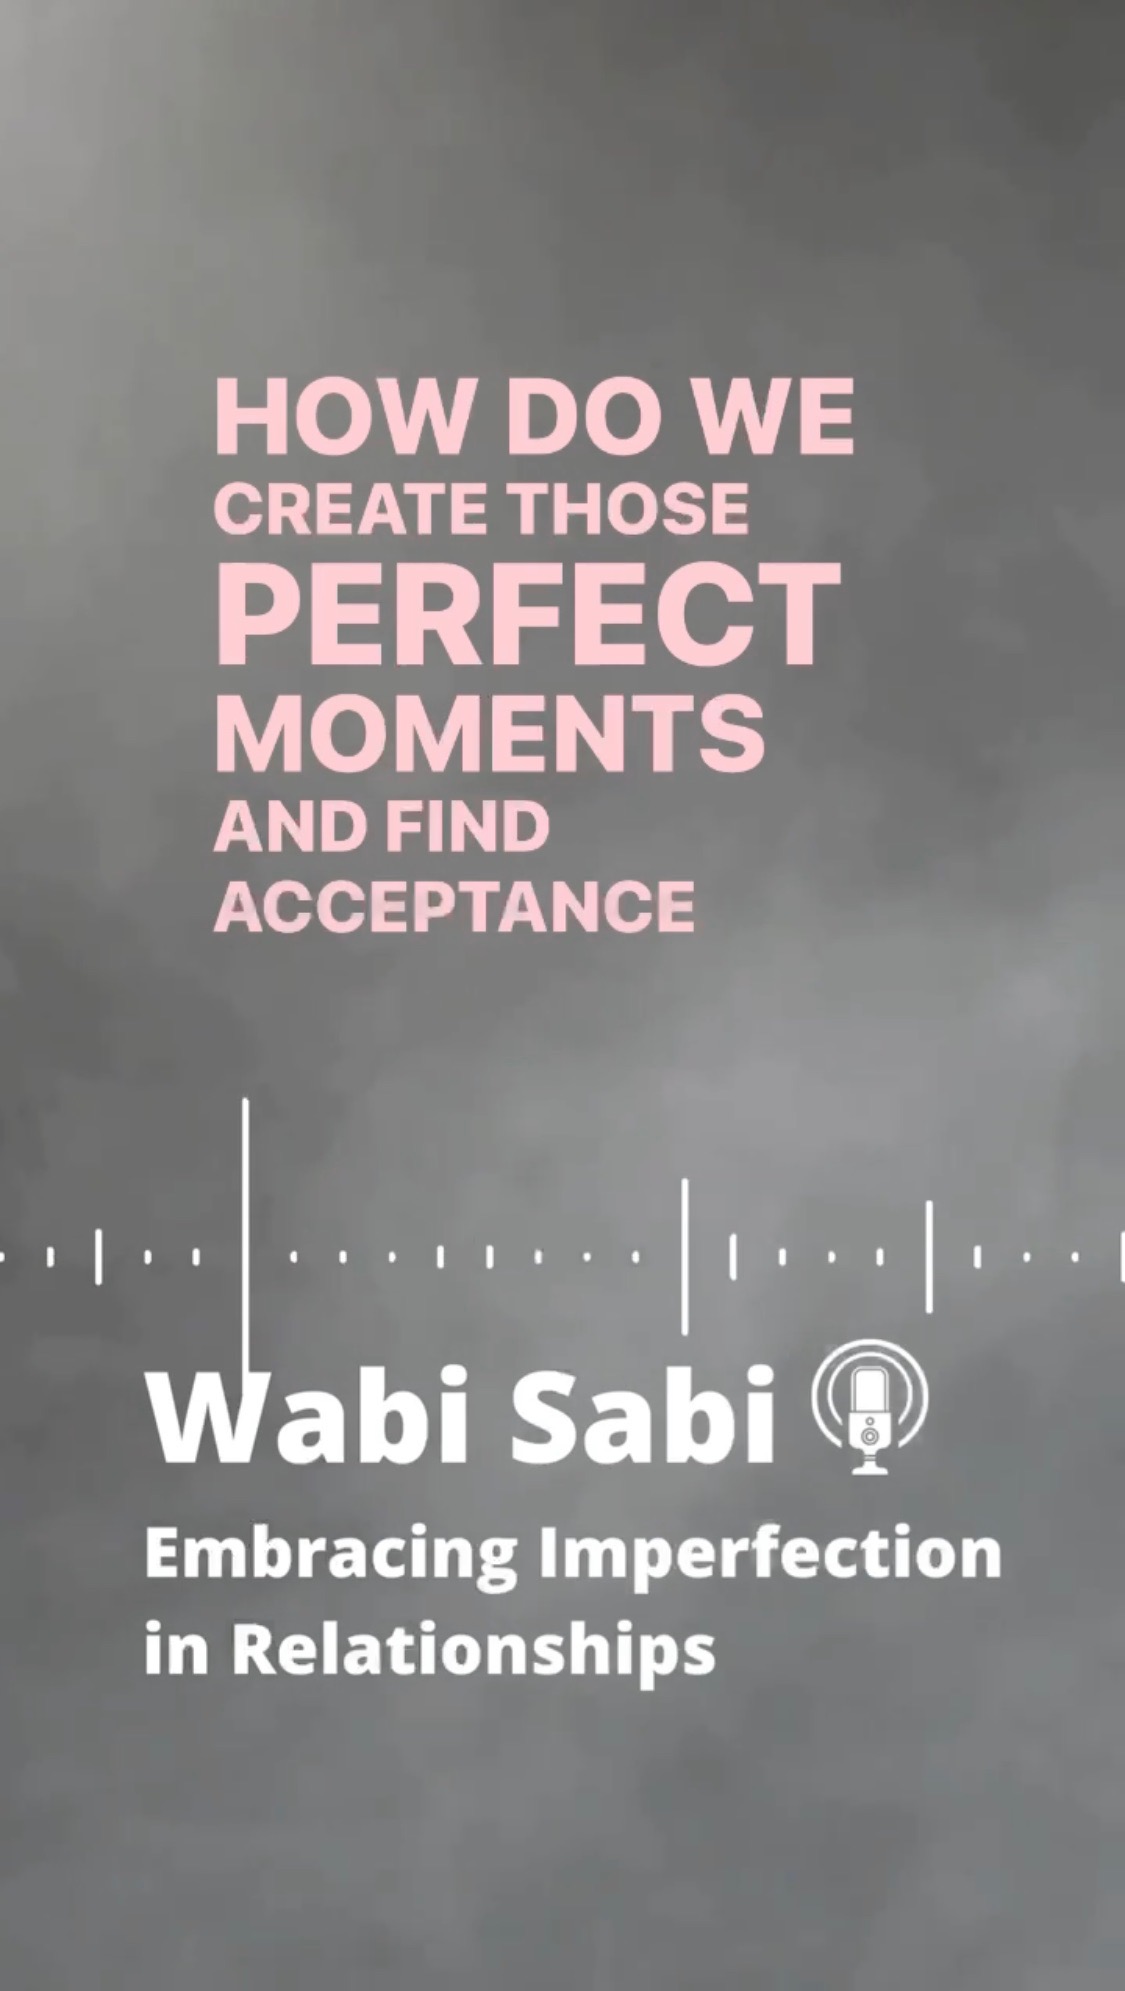 Skip the Beat – Wabi Sabi – Embracing Imperfection in Relationships